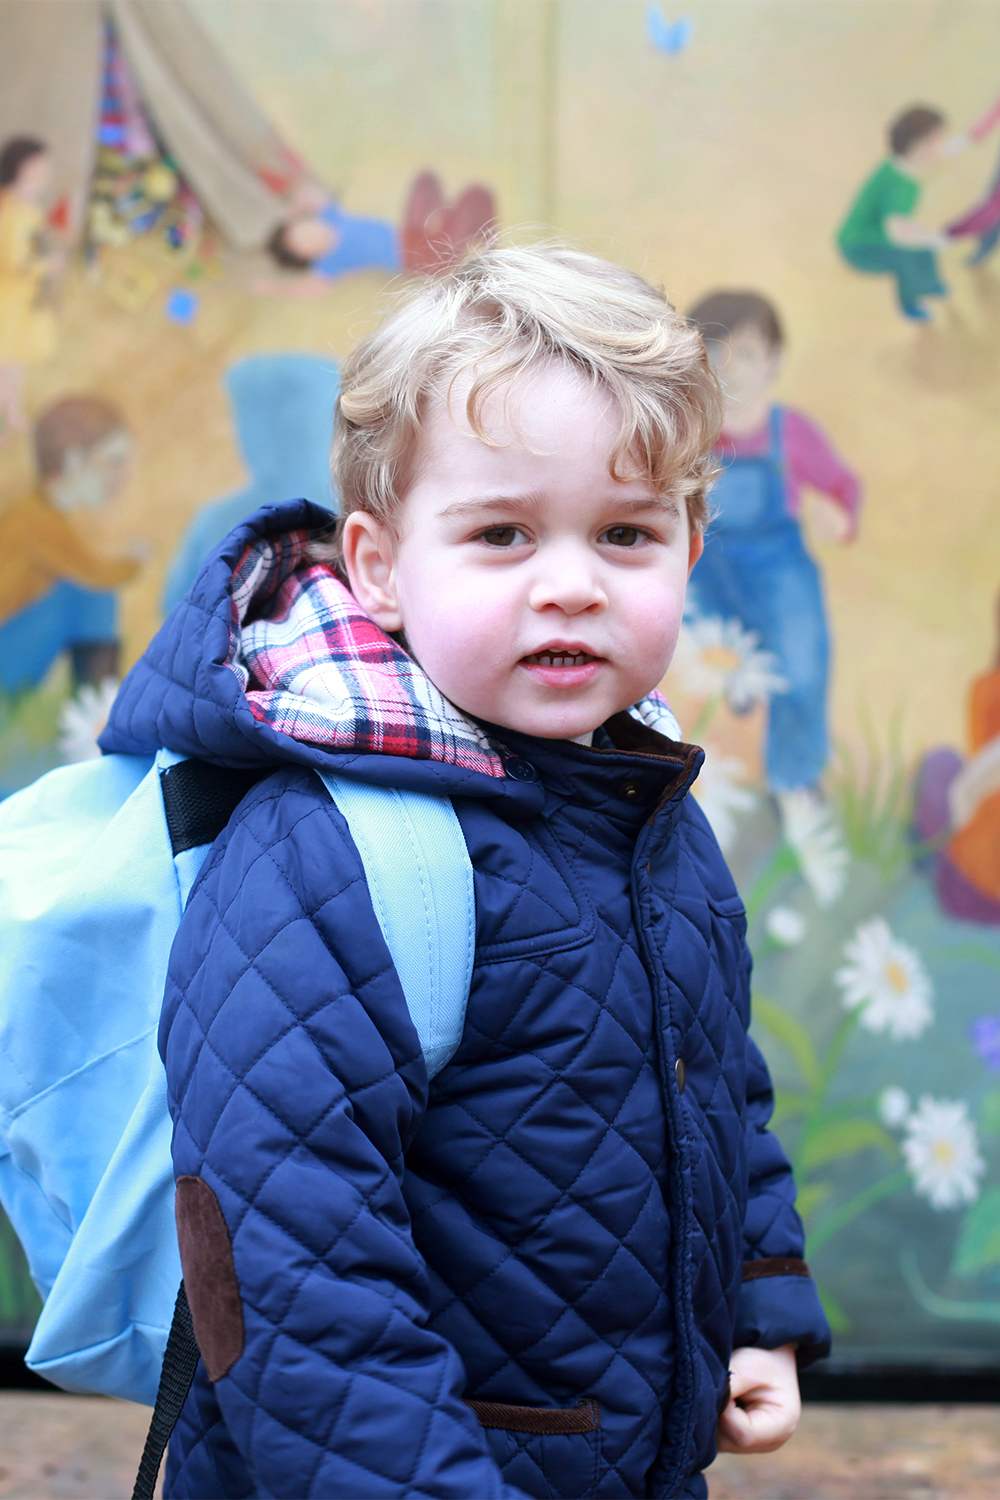 George arriving for his first day of kindy at the Westacre Montessori nursery school on January 6, 2016.